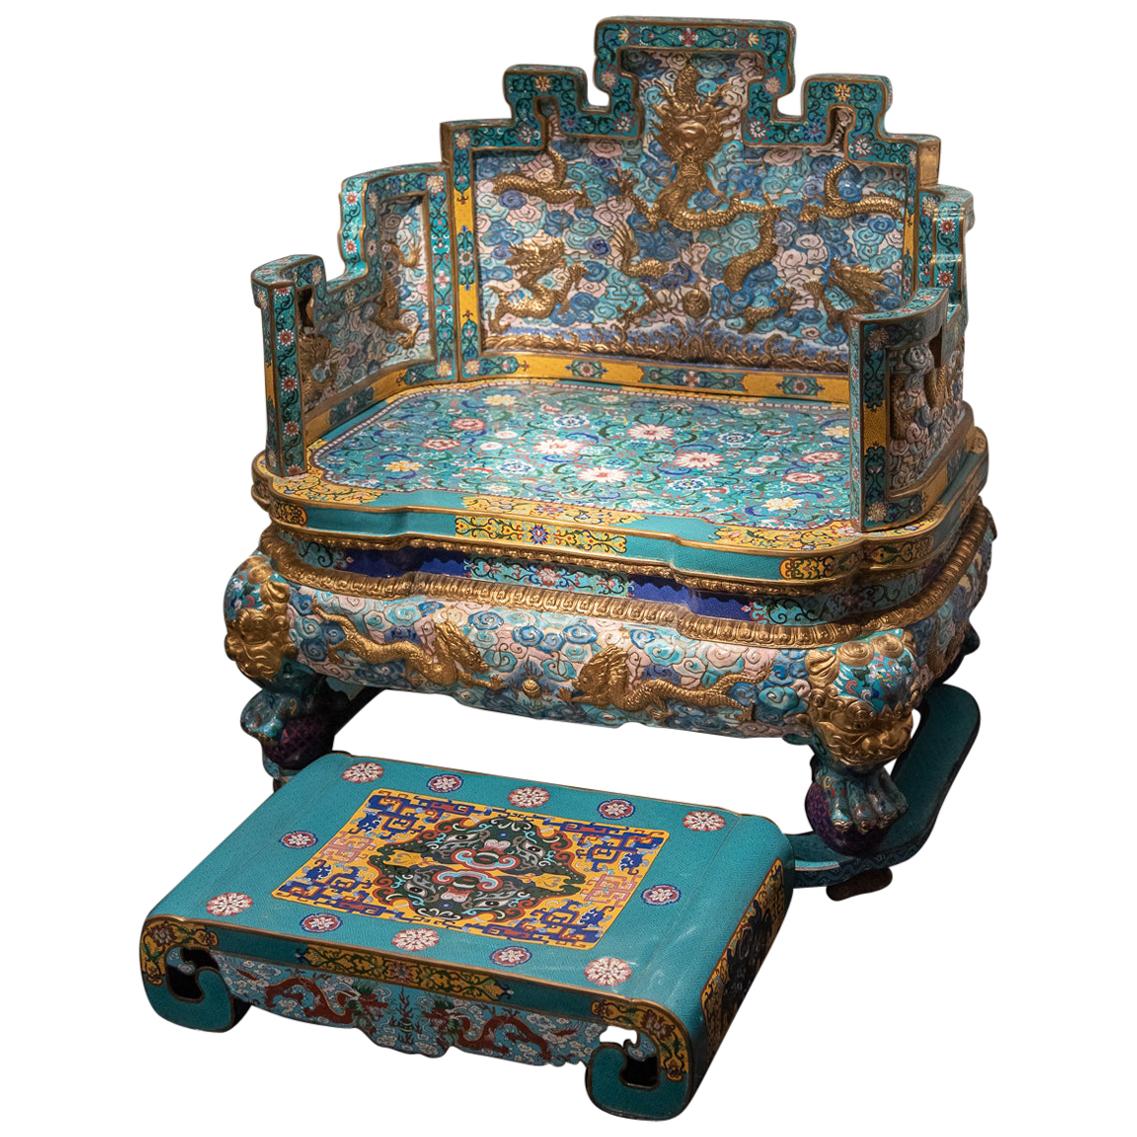 Imperial Gilt Copper and Cloisonné Enameled Throne